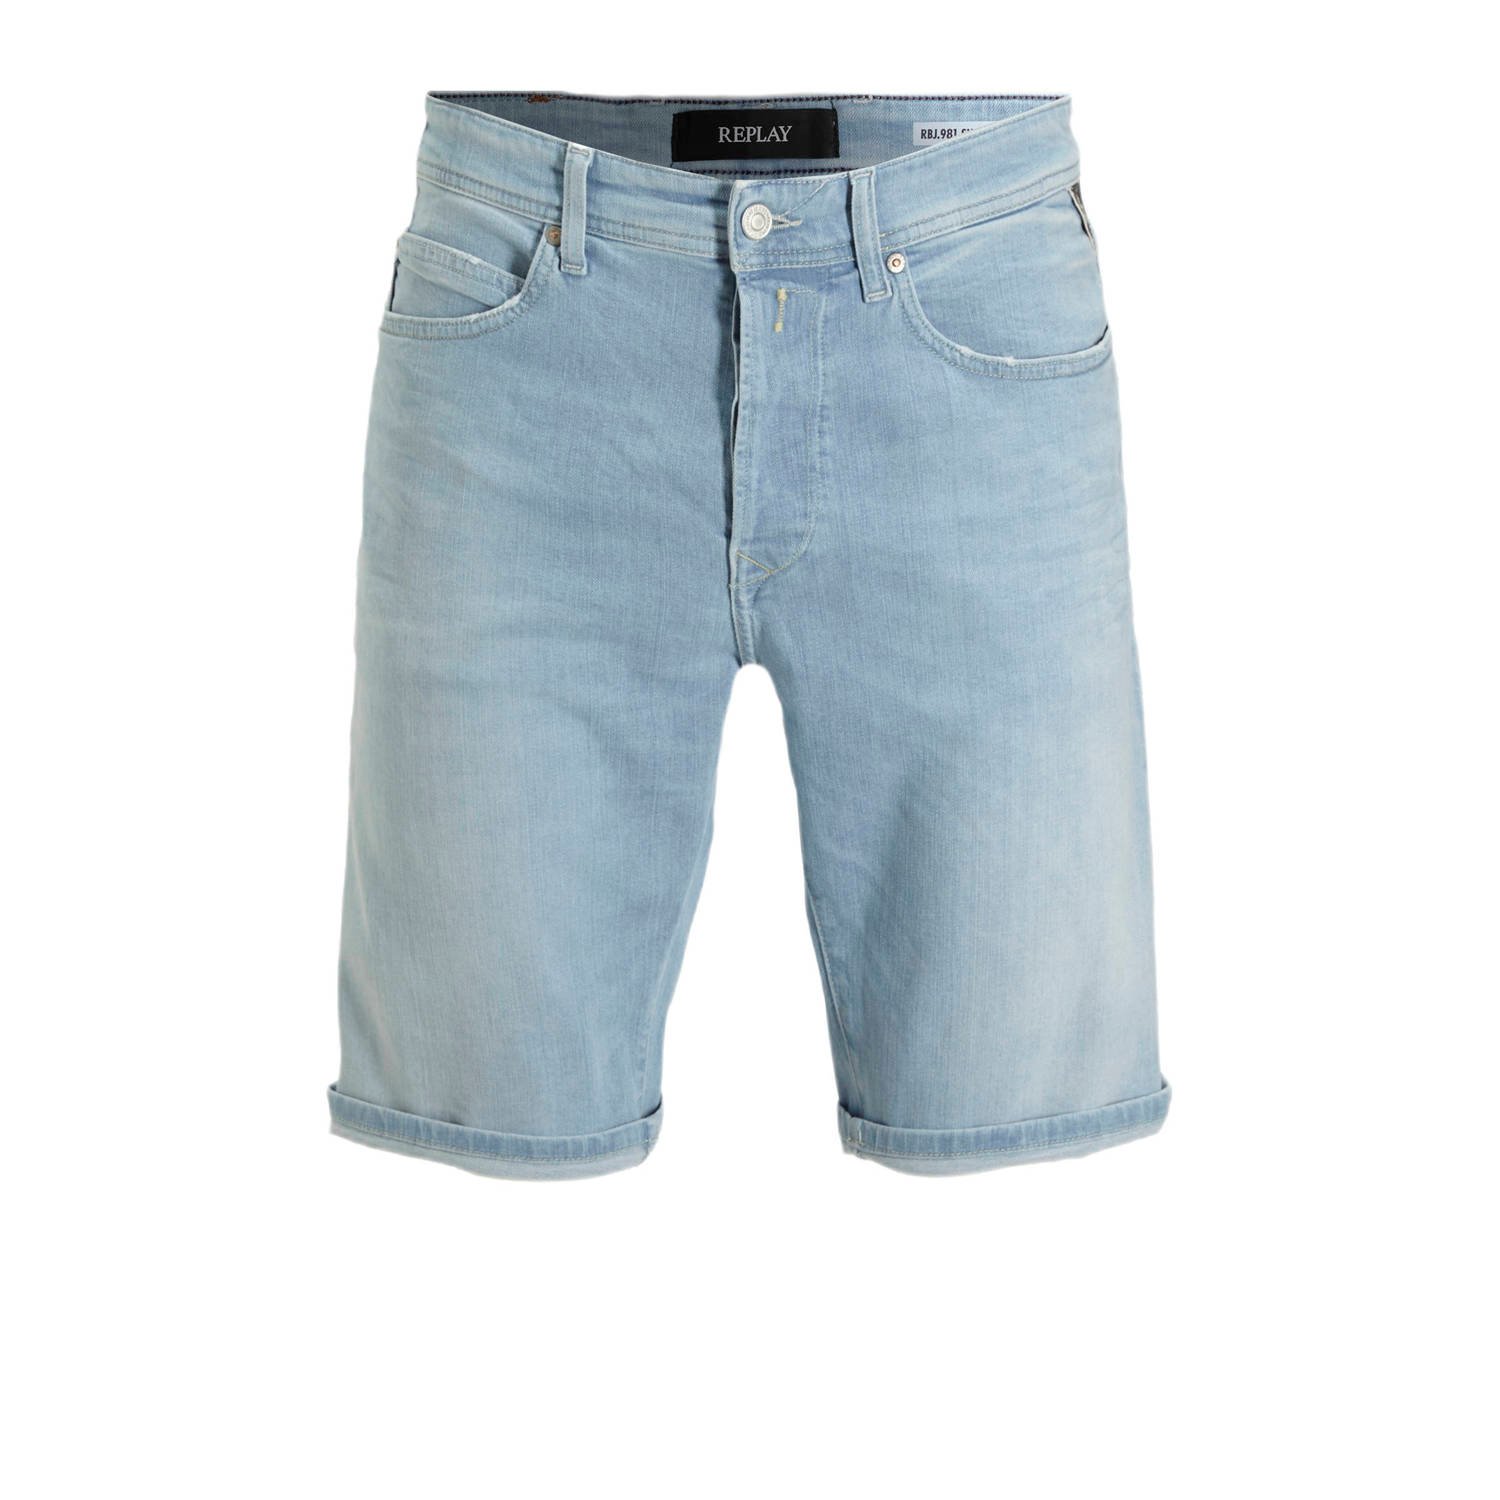 REPLAY tapered fit short RBJ.981 light blue